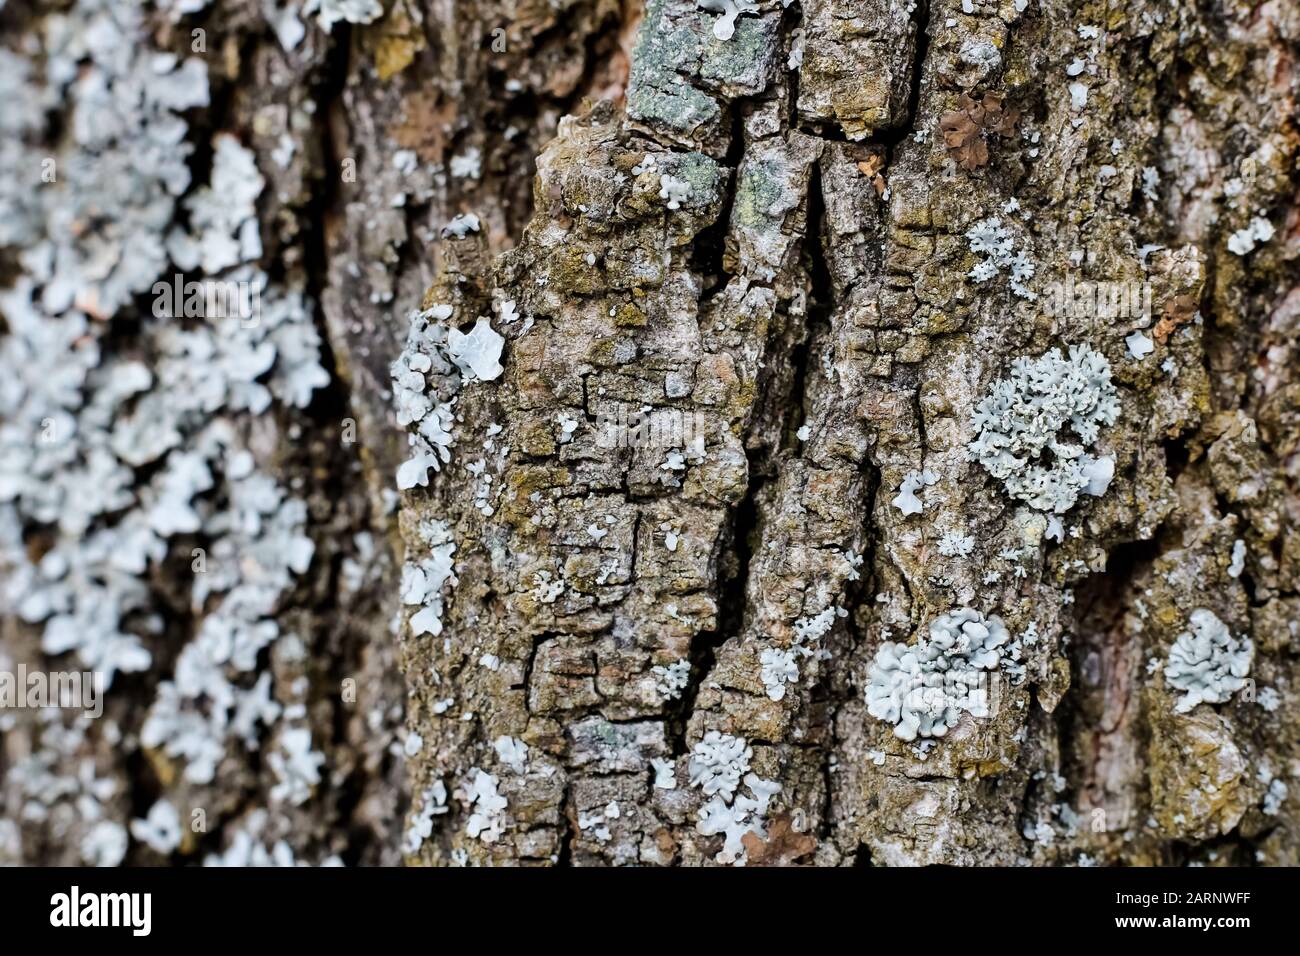 Blue moss on a tree trunk close up Stock Photo